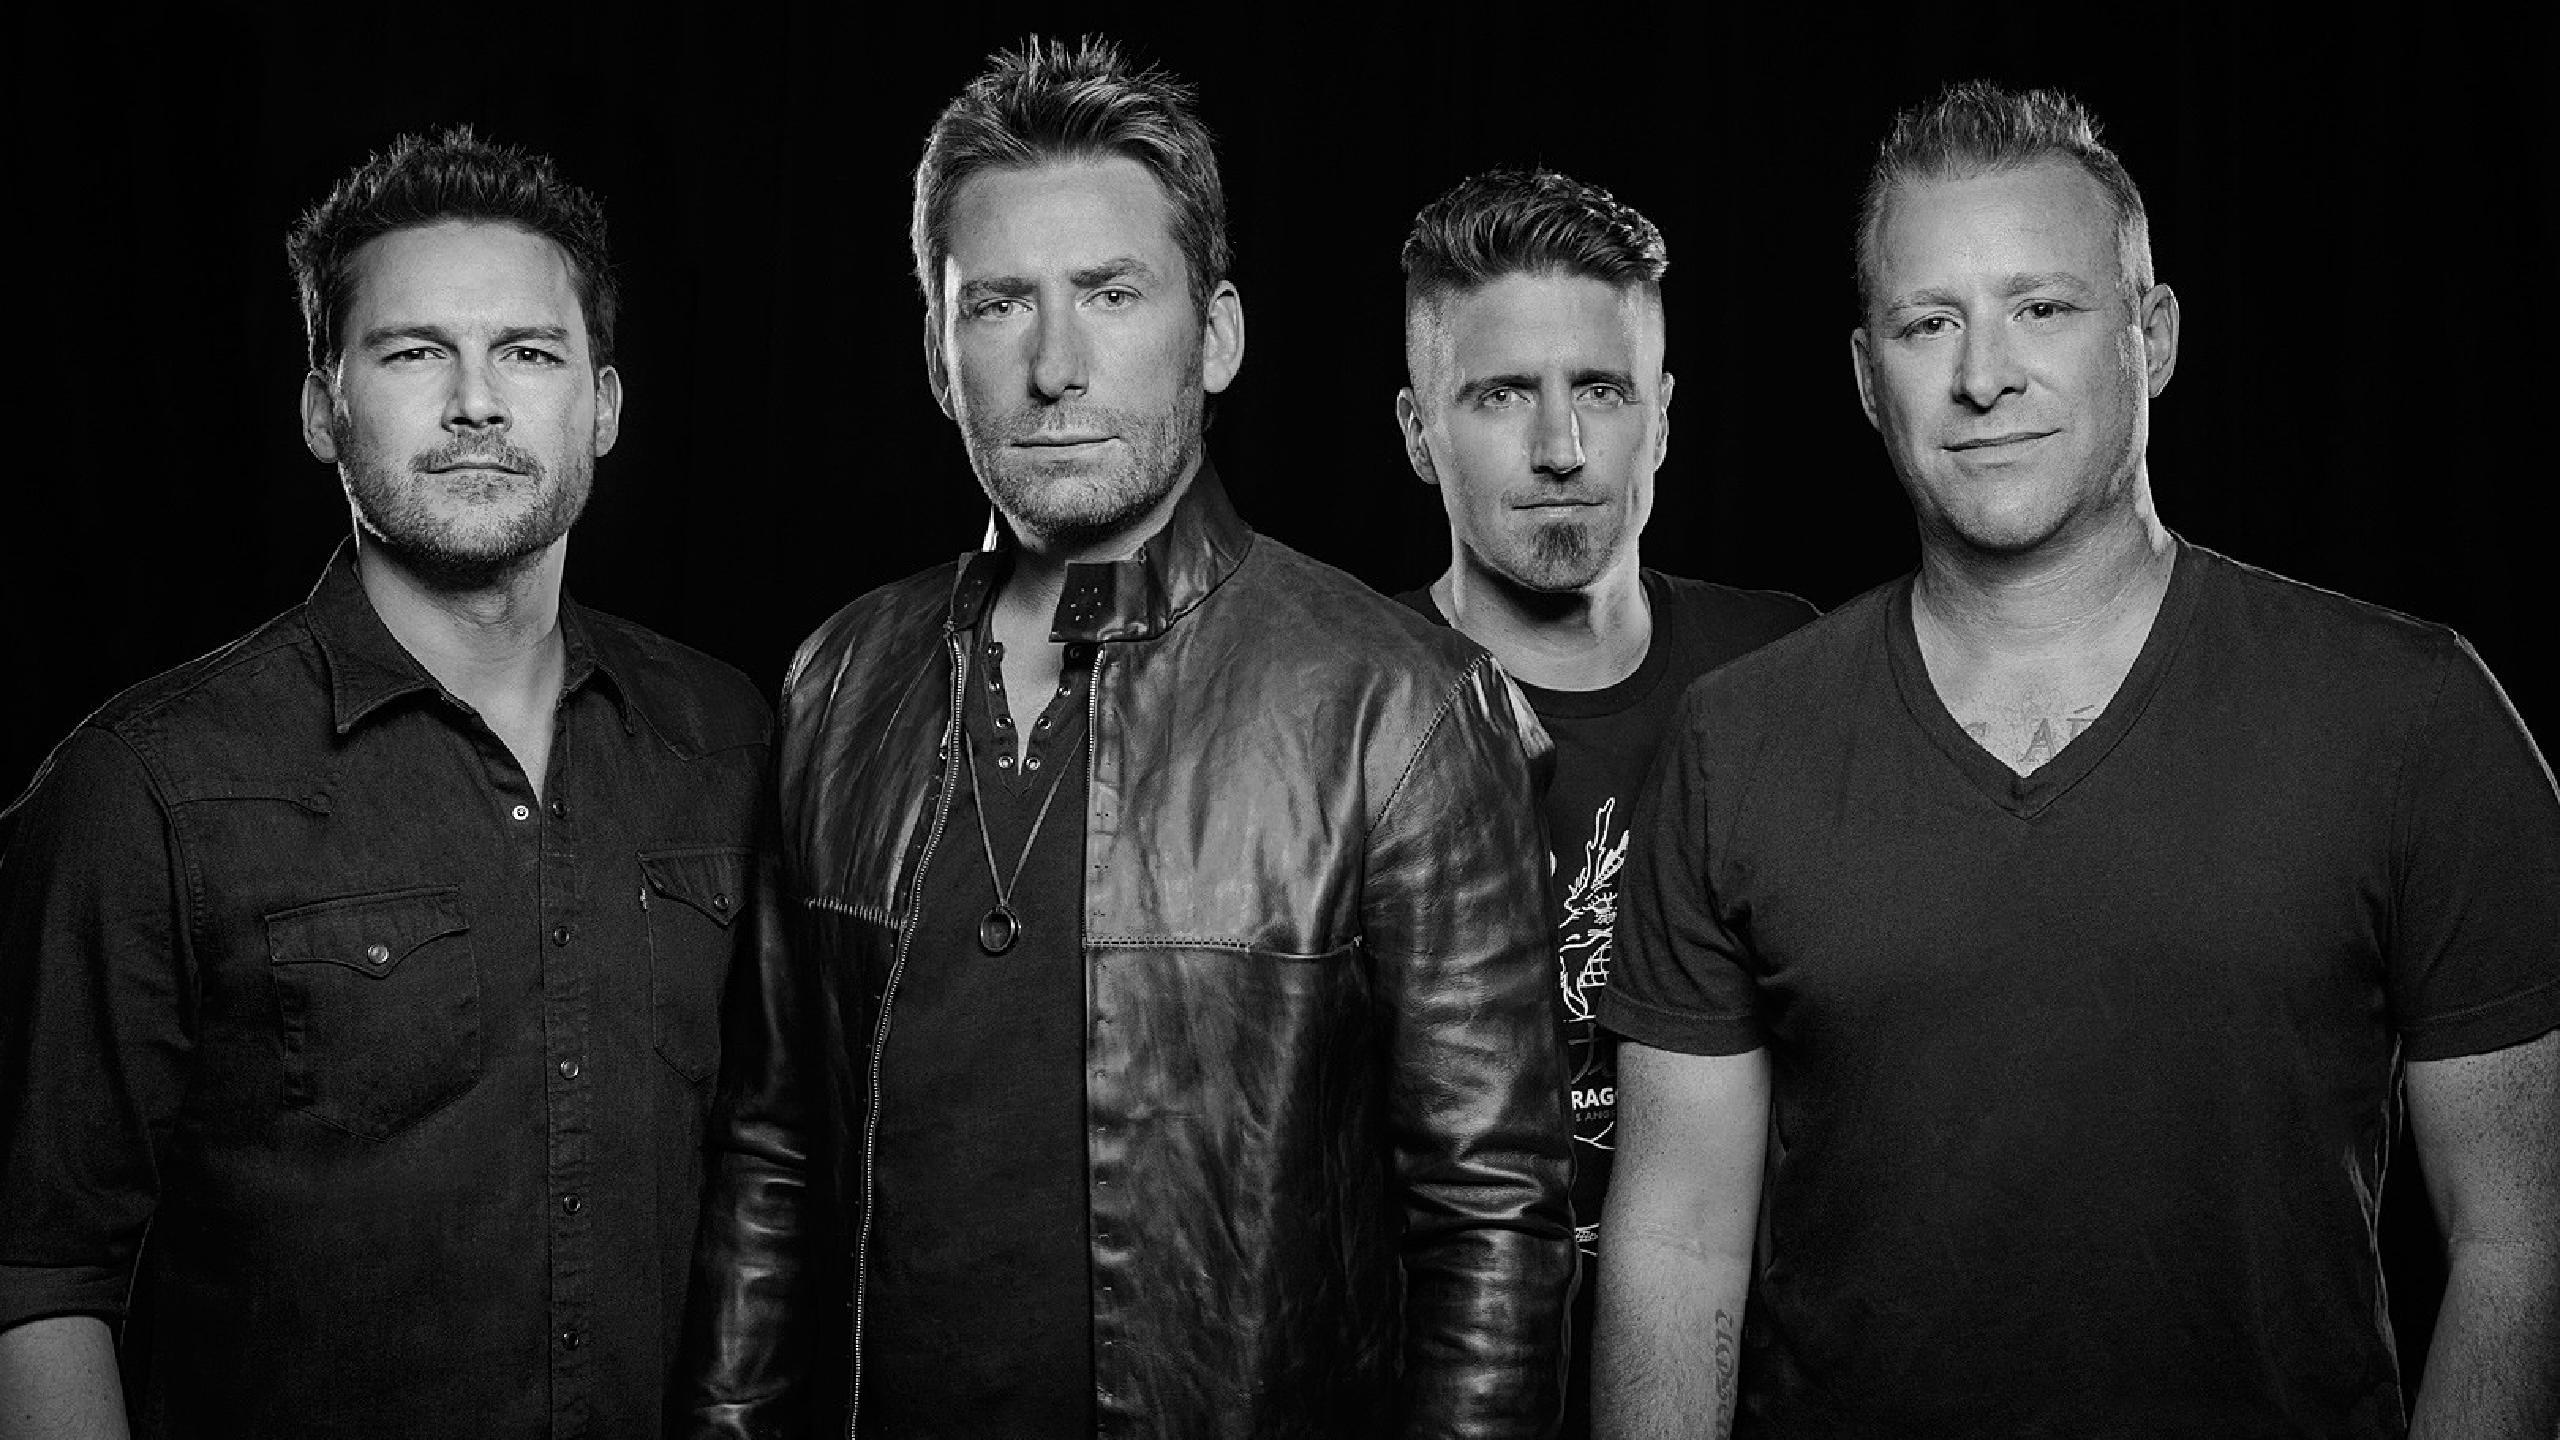 Nickelback tour dates 2017 2018. Nickelback tickets and concerts